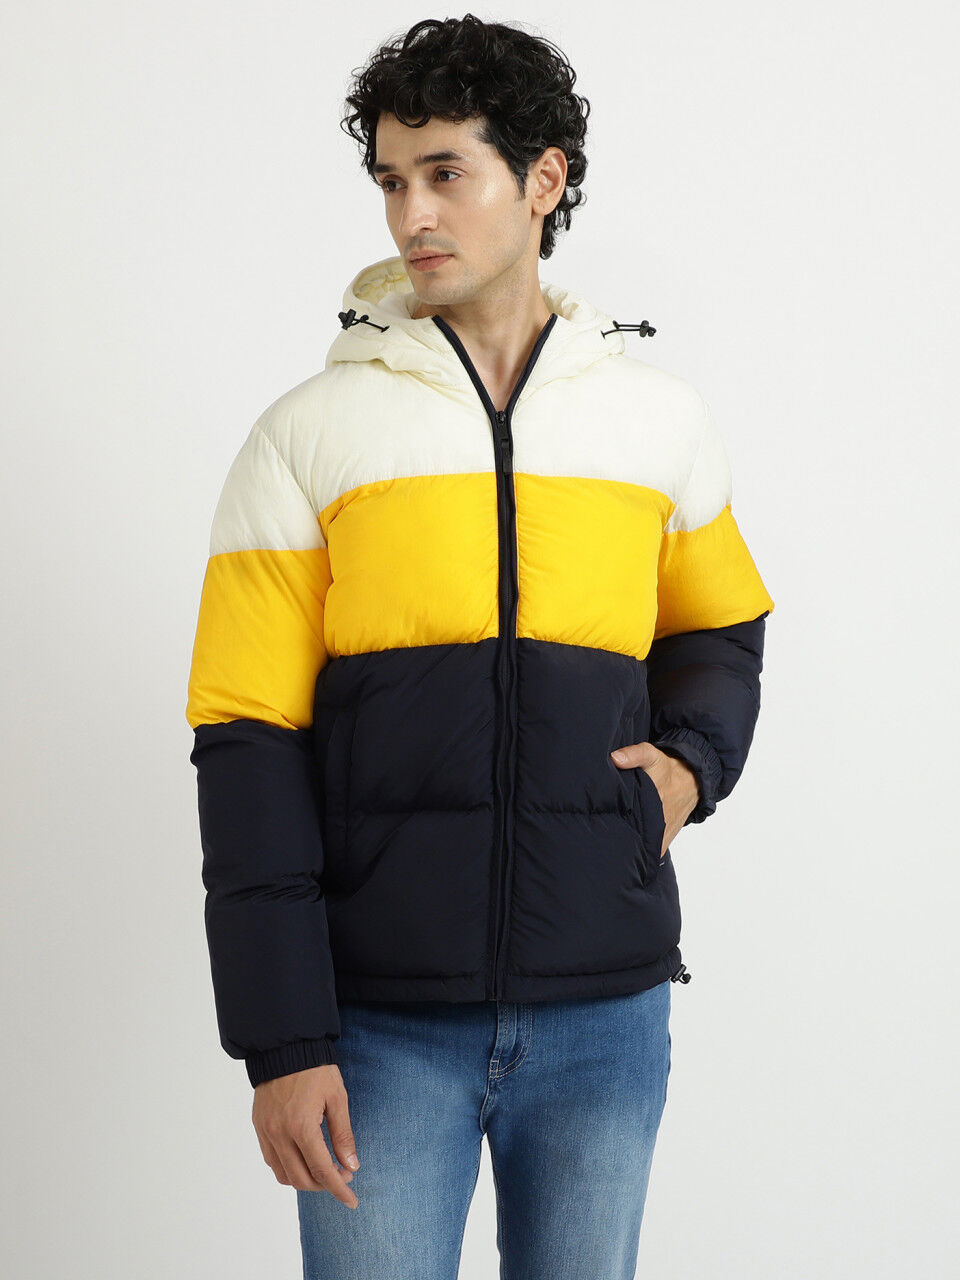 Useless development of New arrival Men's Coats and Jackets Collection 2021 | Benetton